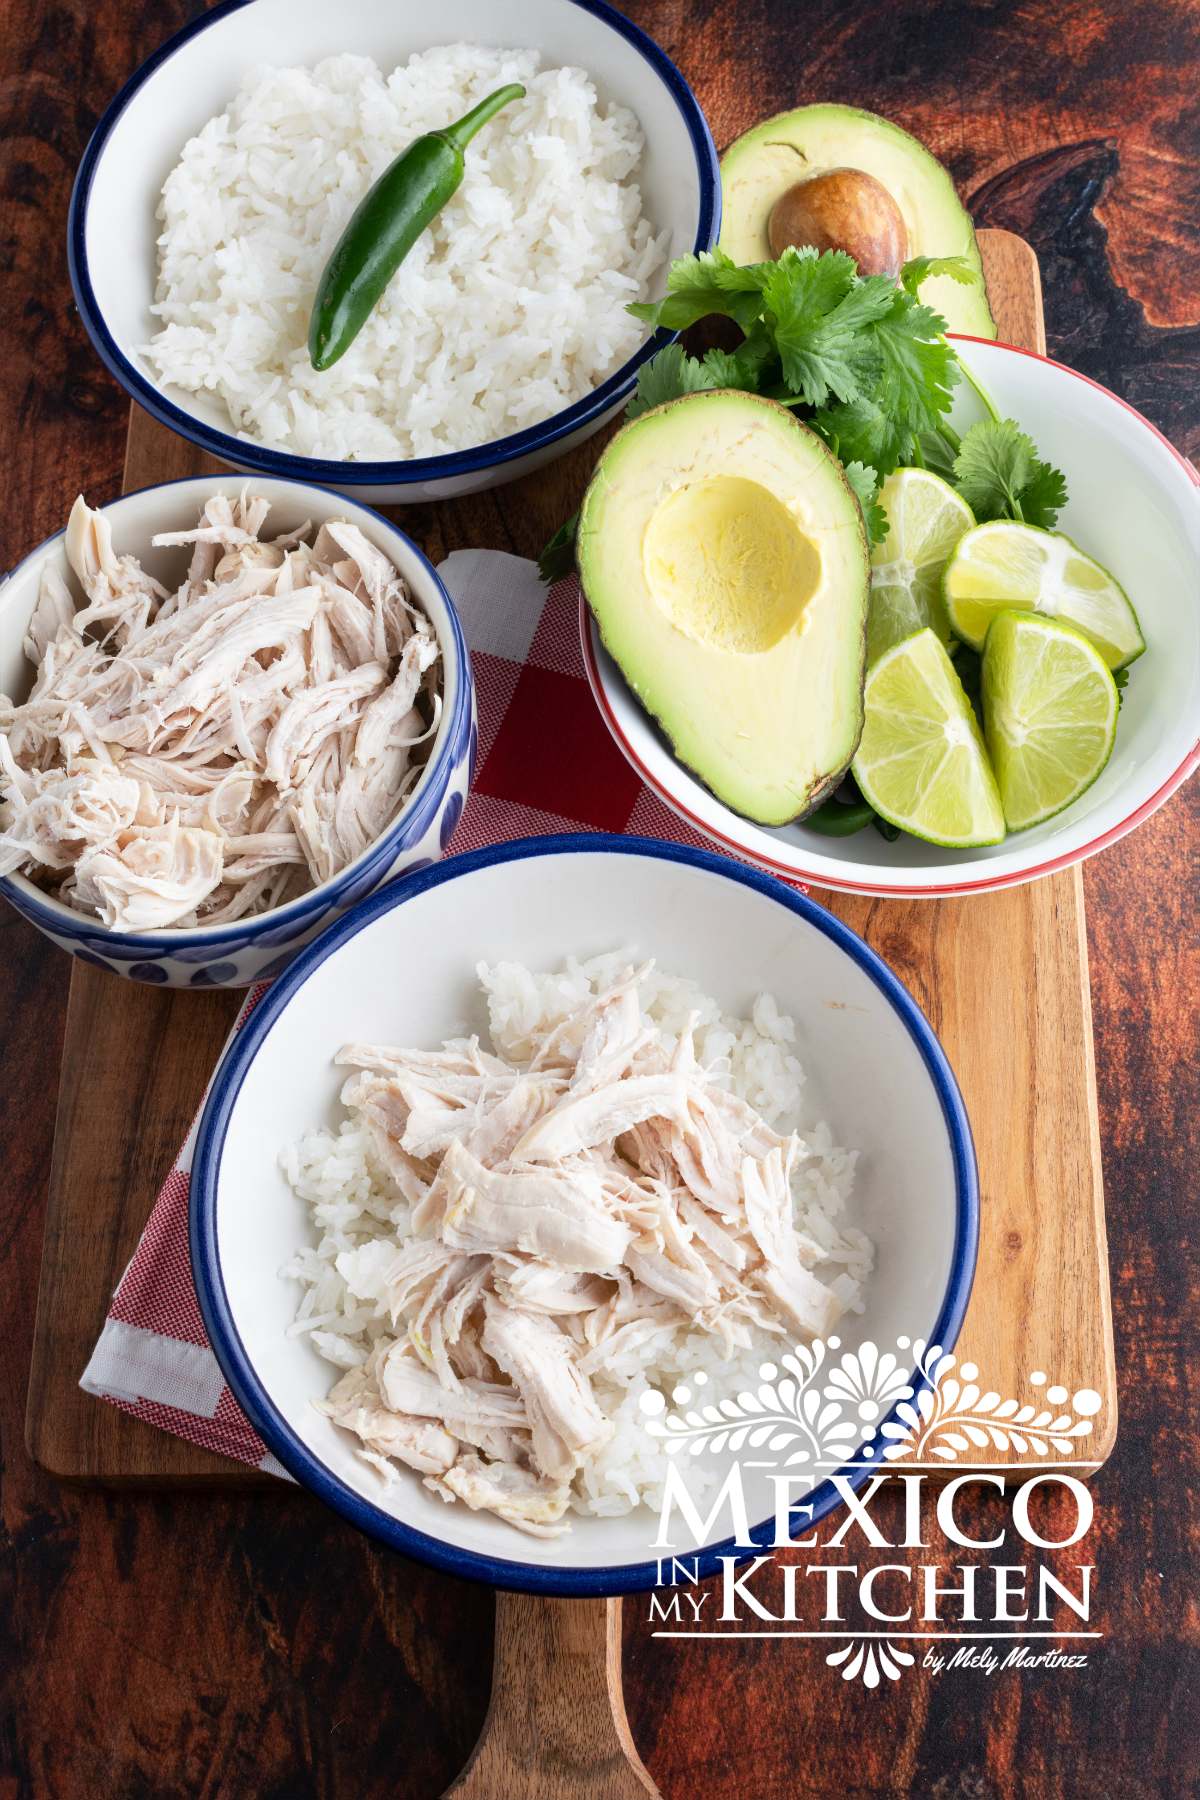 Chicken and rice served in a white bowl, next to another bowl with avocado, cilantro and limes, rices, and white rice.